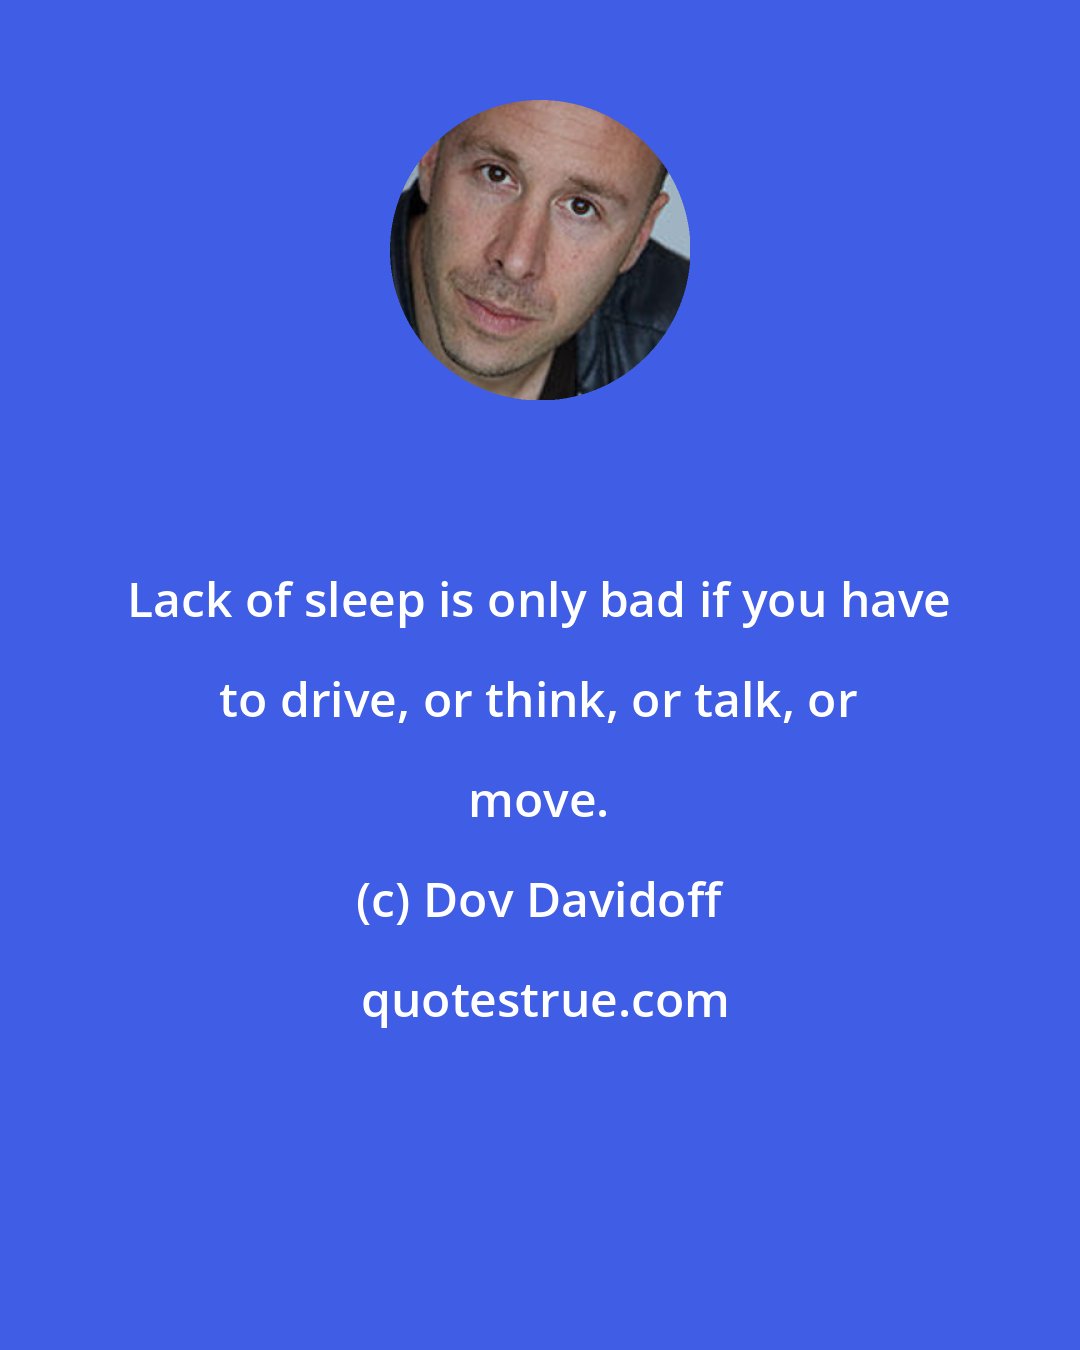 Dov Davidoff: Lack of sleep is only bad if you have to drive, or think, or talk, or move.